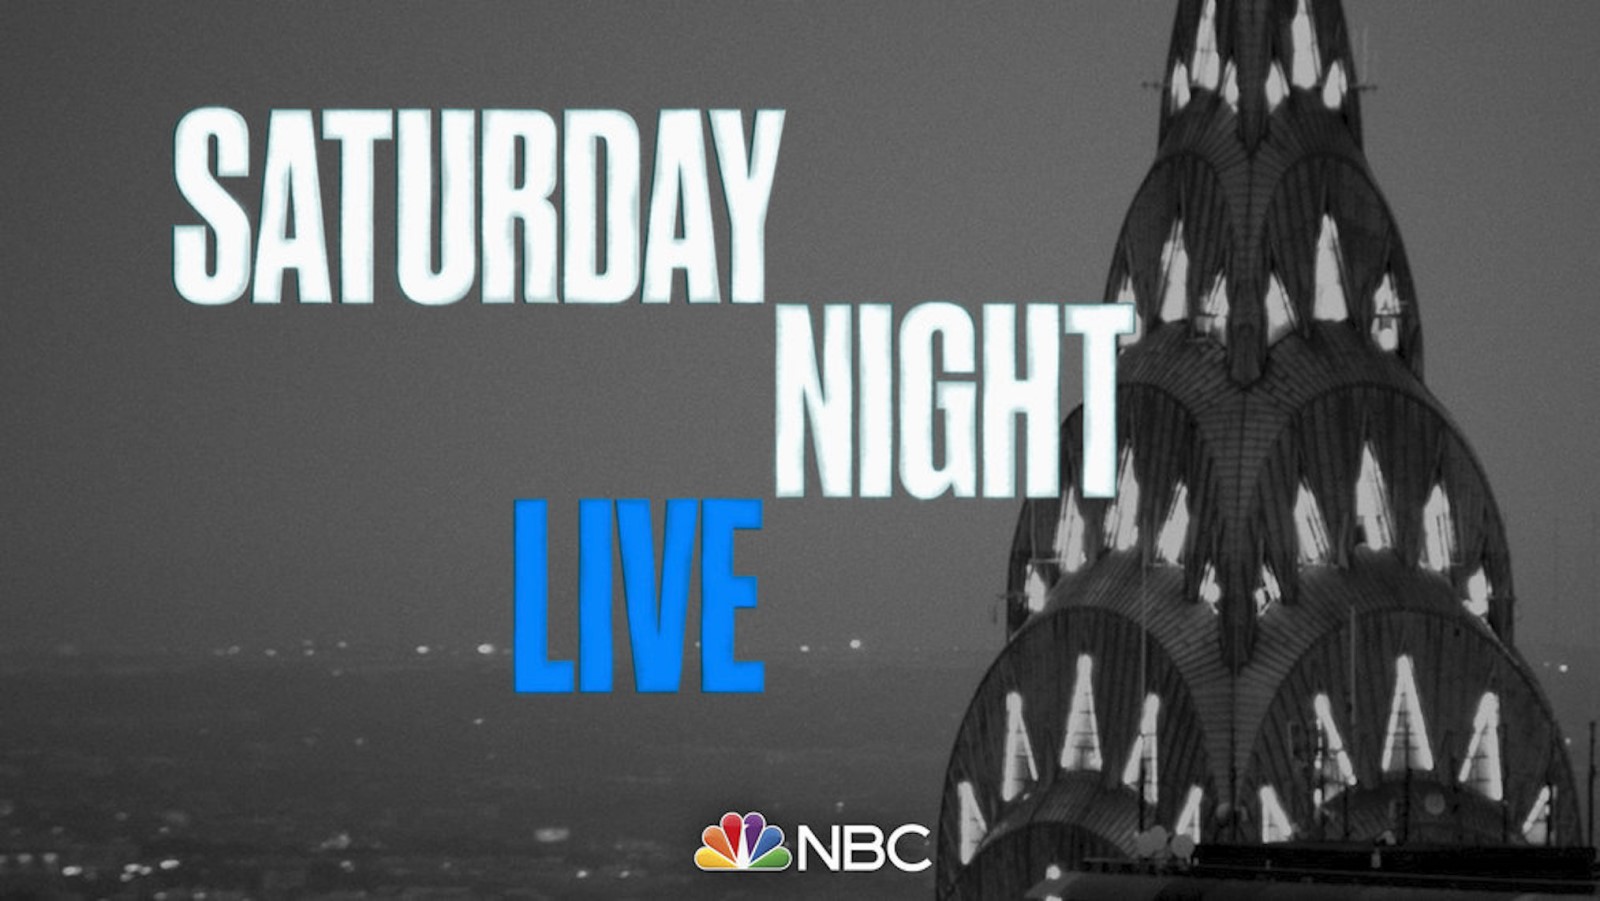 How To Watch Saturday Night Live Season 46 Without Cable Live Stream Snl Tonight Technadu